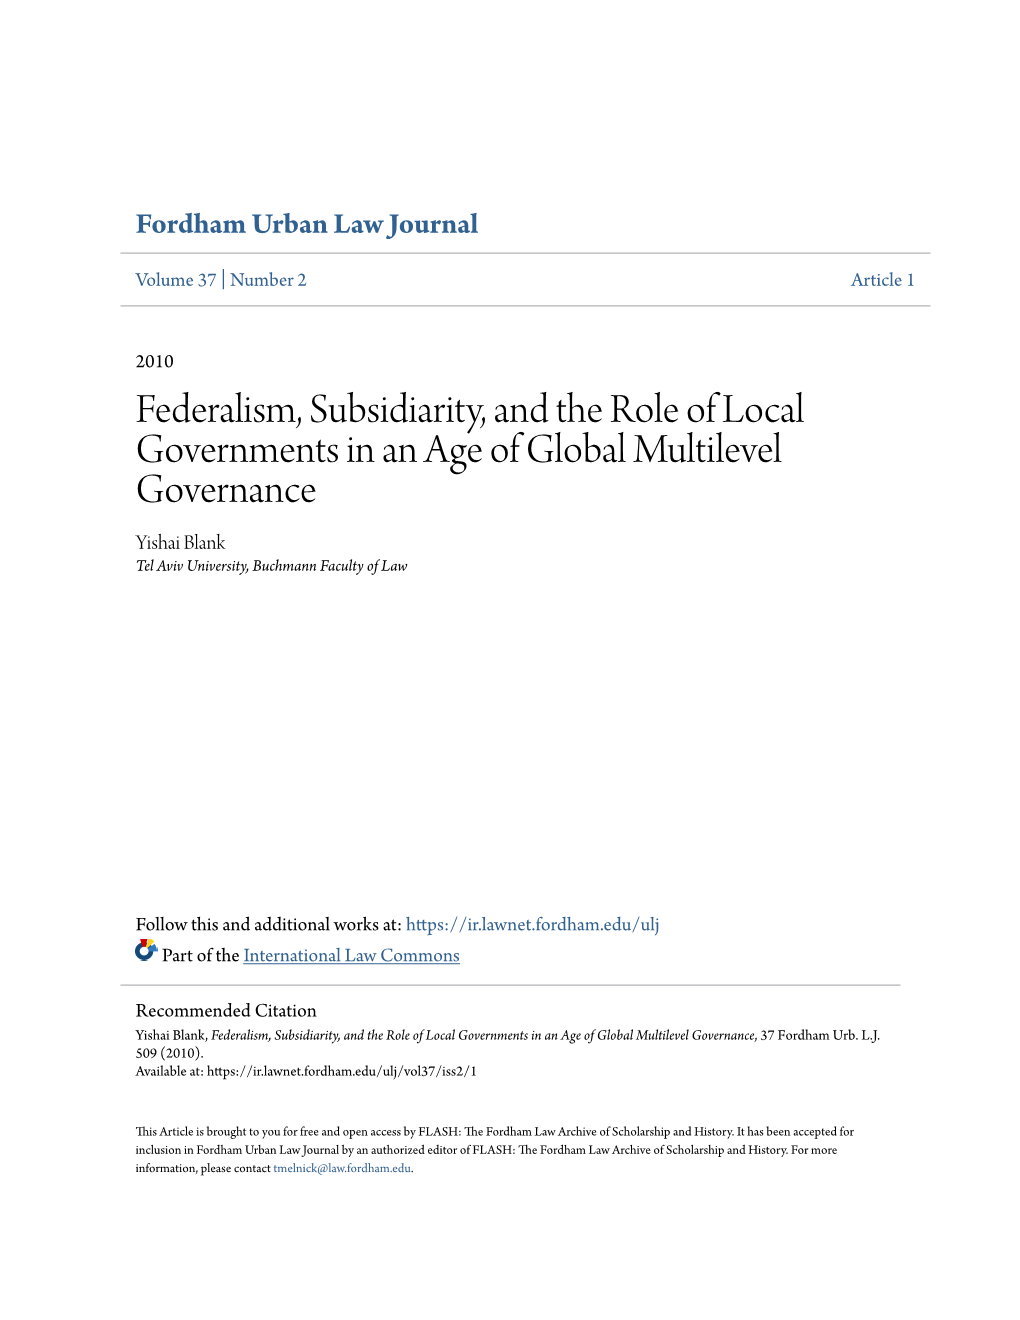 Federalism, Subsidiarity, and the Role of Local Governments in an Age of Global Multilevel Governance Yishai Blank Tel Aviv University, Buchmann Faculty of Law